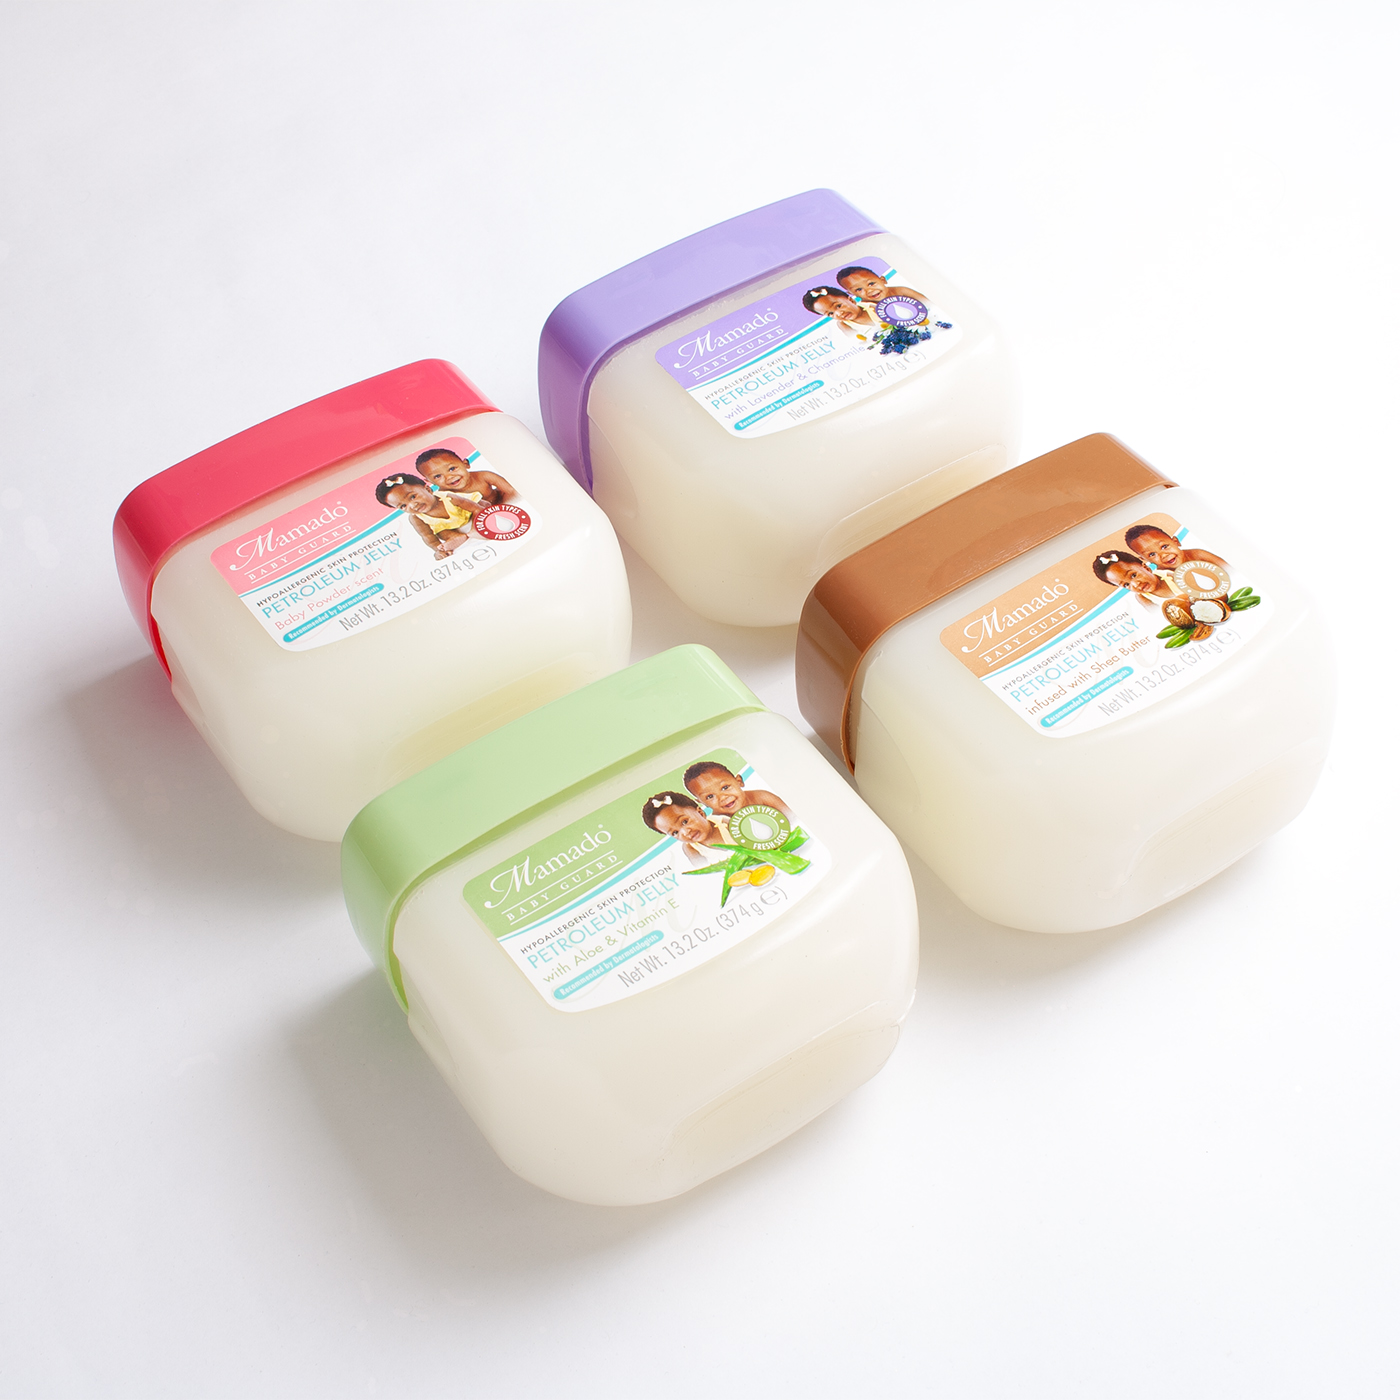 Baby care label identity design project for Mamado Baby Guard's range of fragranced petroleum jelly baby skin products.